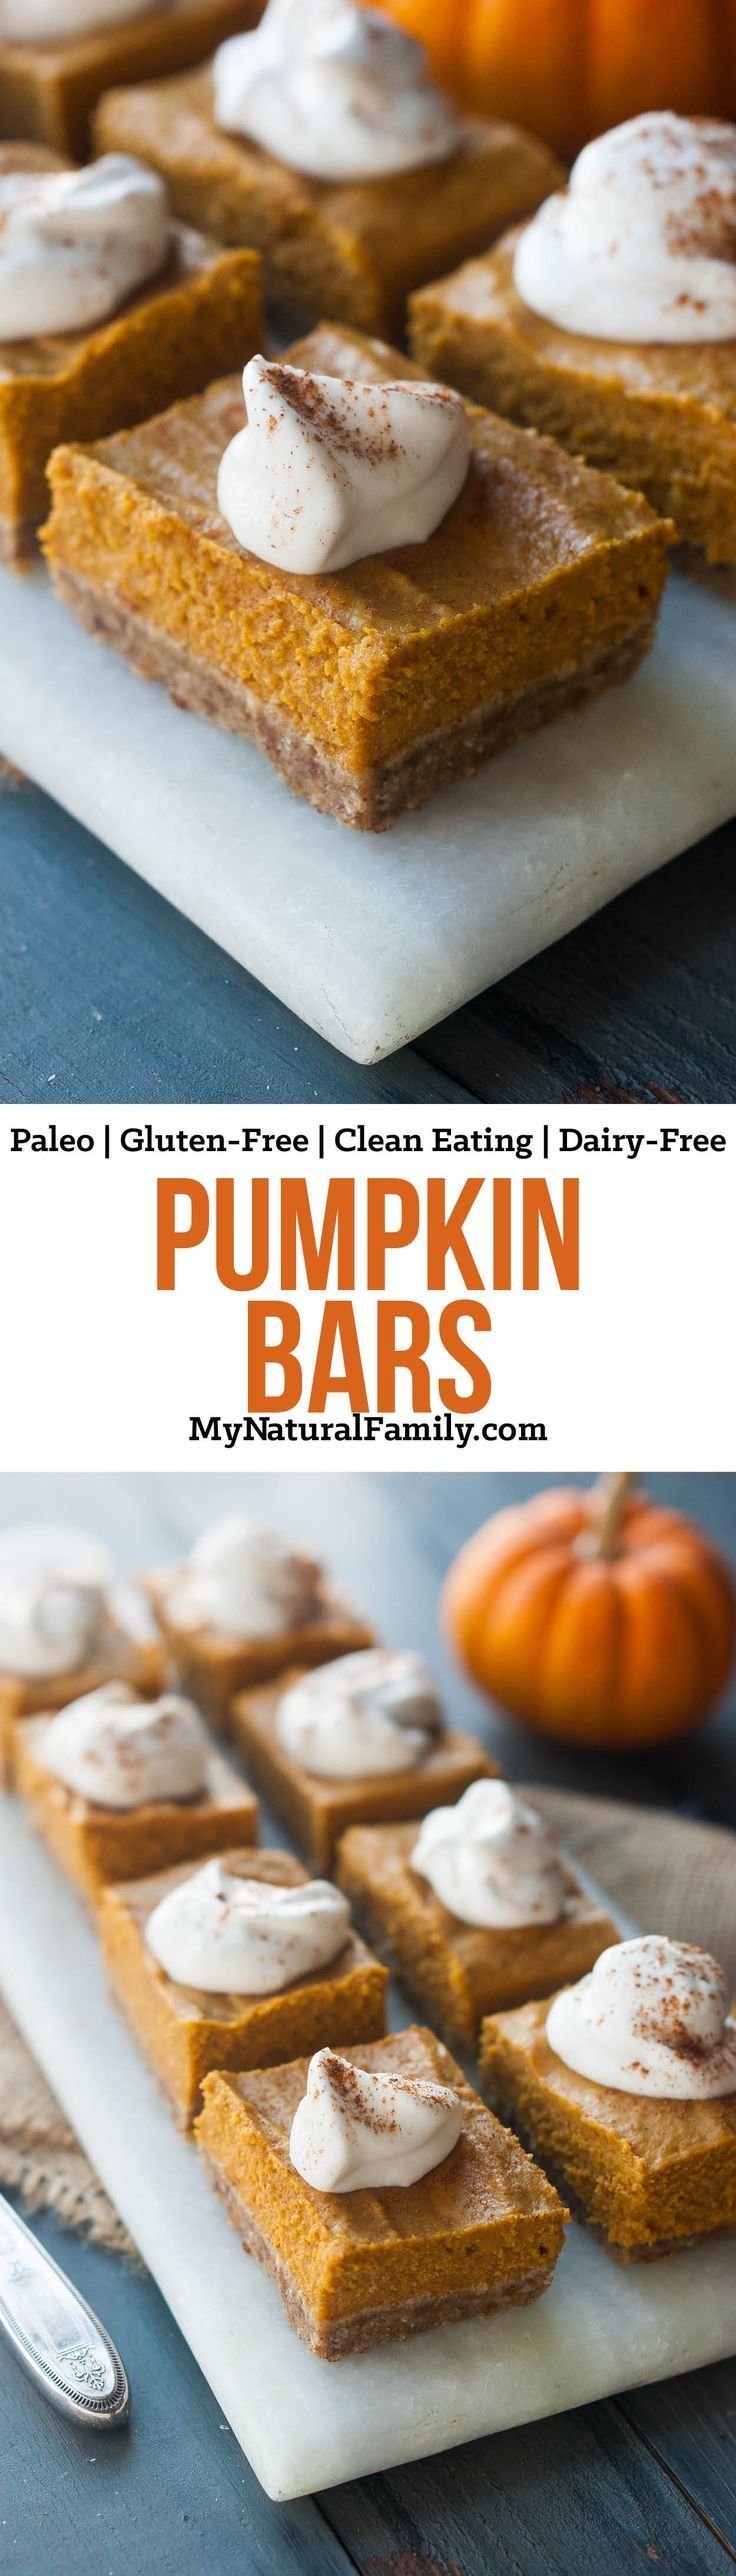 Pumpkin Bars Recipe {Paleo, Gluten-Free, Clean Eating, Dairy-Free} – I’m sick of not eating what everyone else is having, so I’m